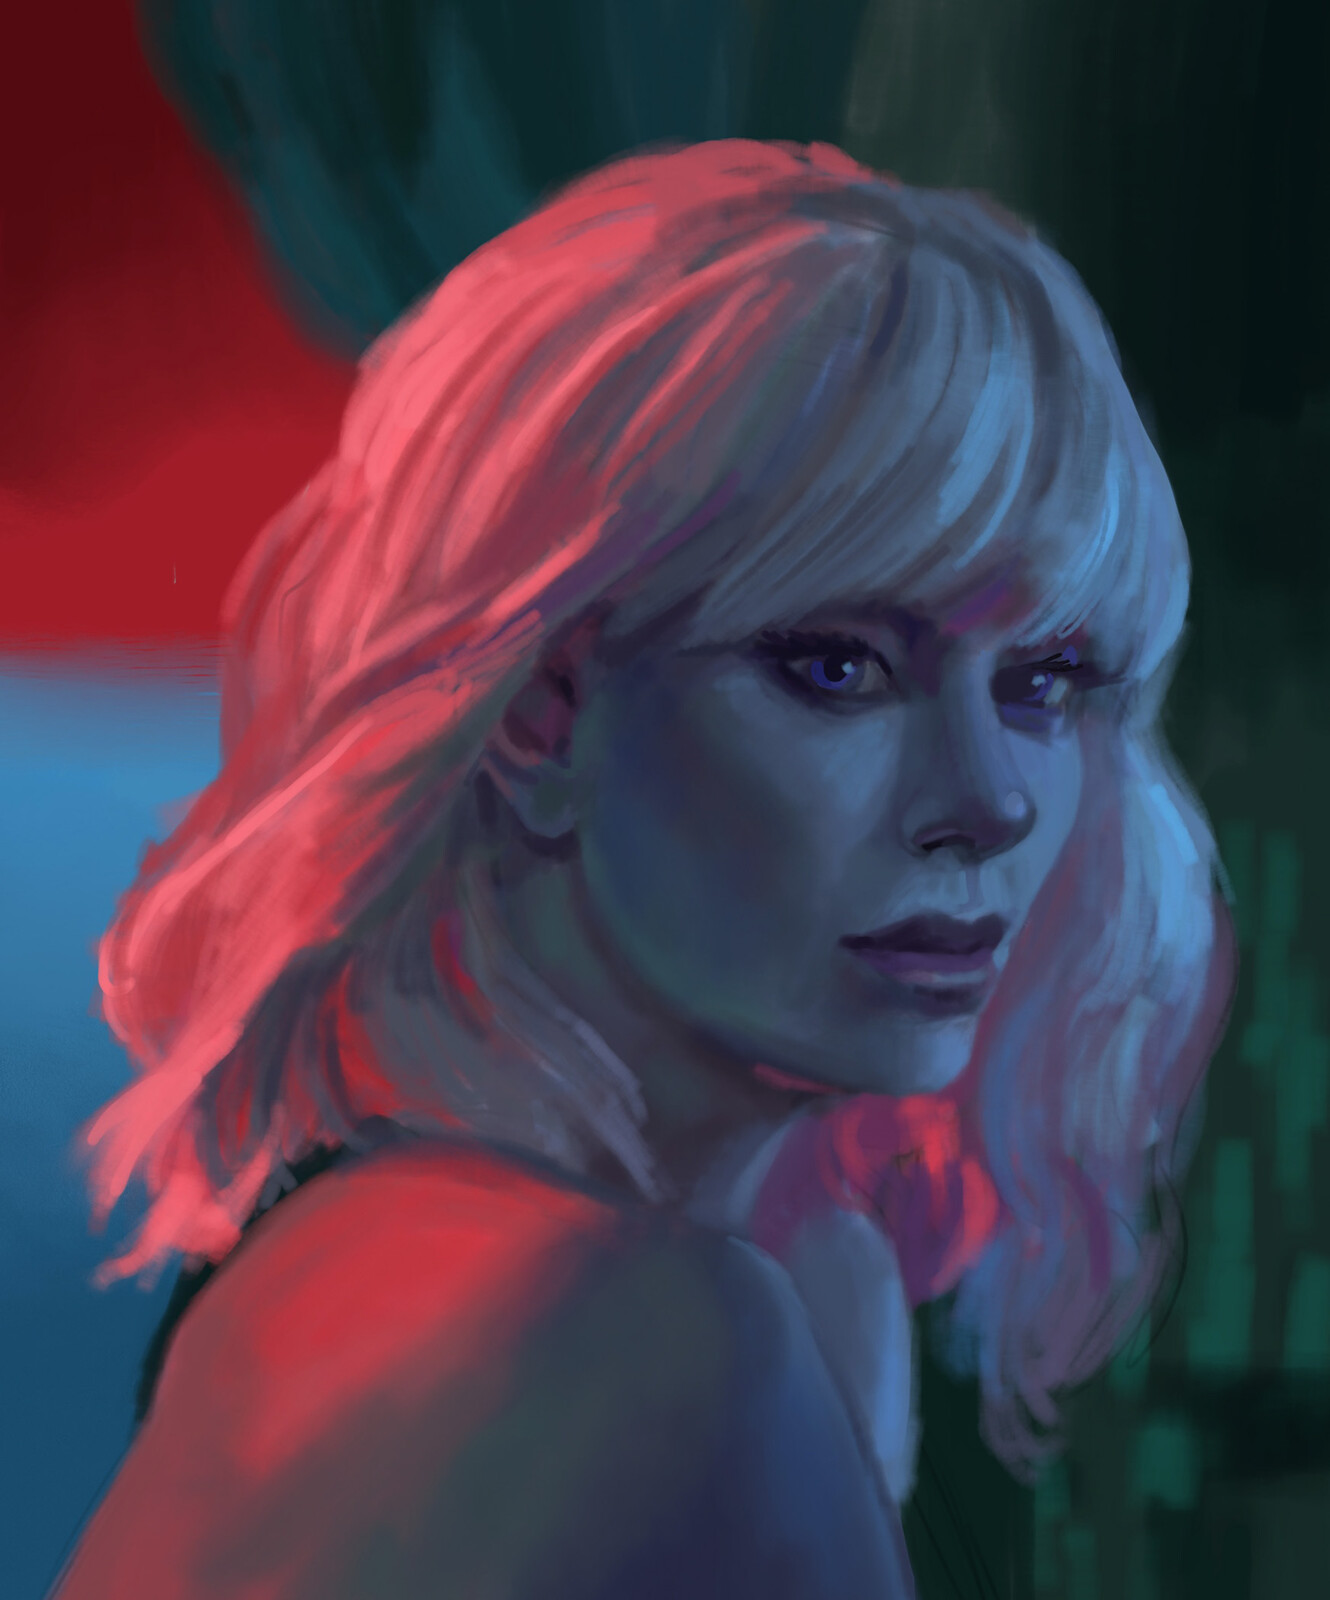 Charlize Theron from "Atomic Blonde"